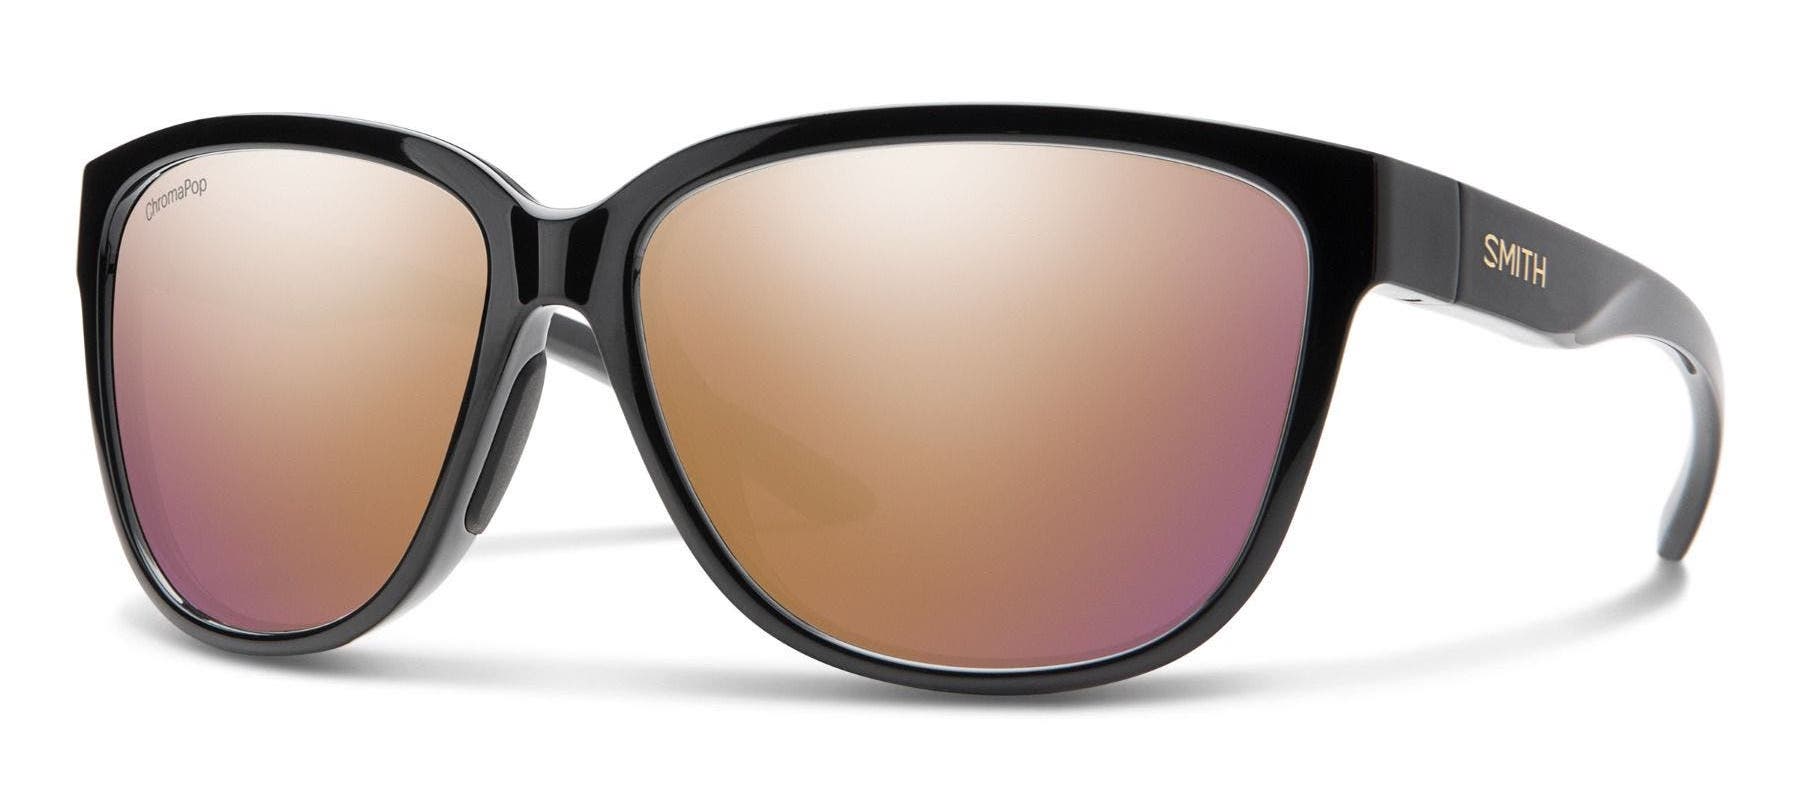 smith monterey sunglasses in black with rose gold polarized lenses in lineup of best fishing sunglasses for small faces